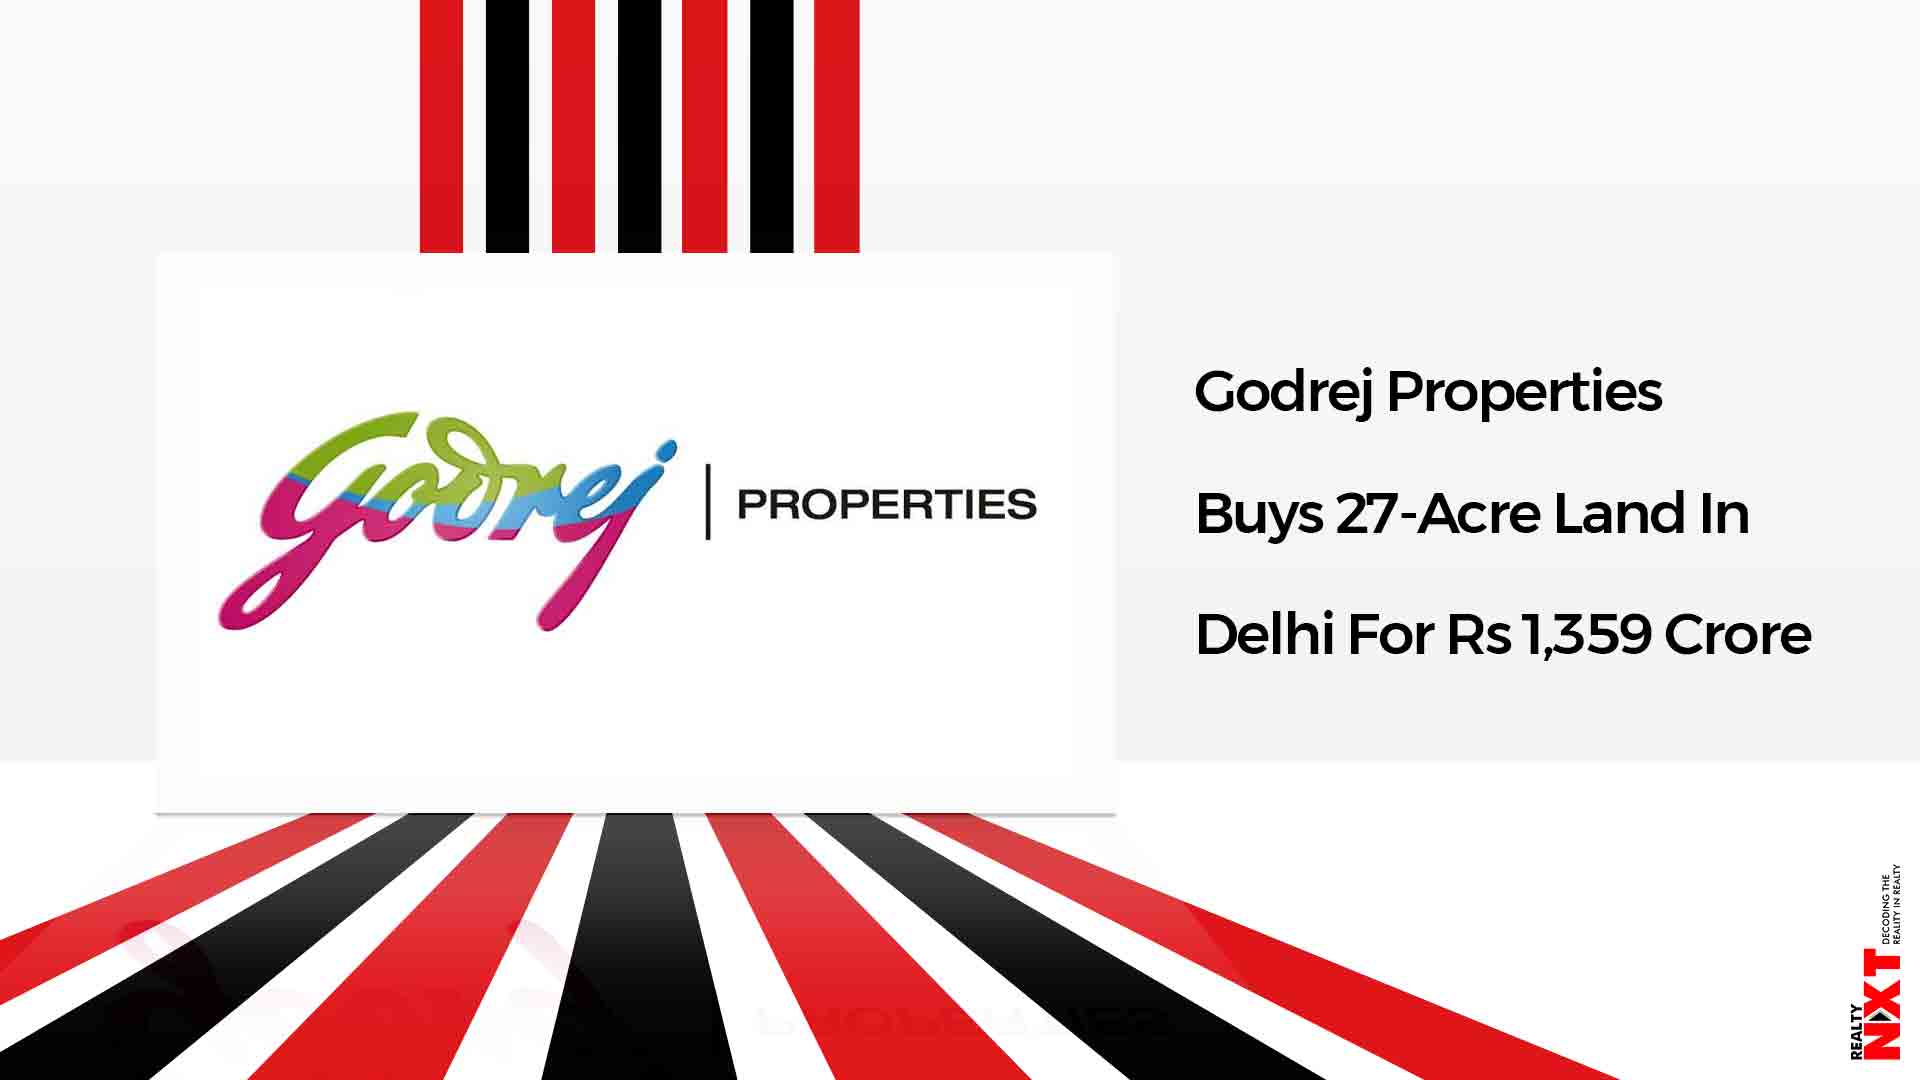 godrej-properties-will-acquire-26-58-acres-land-in-new-delhi-from-the-railway-land-development